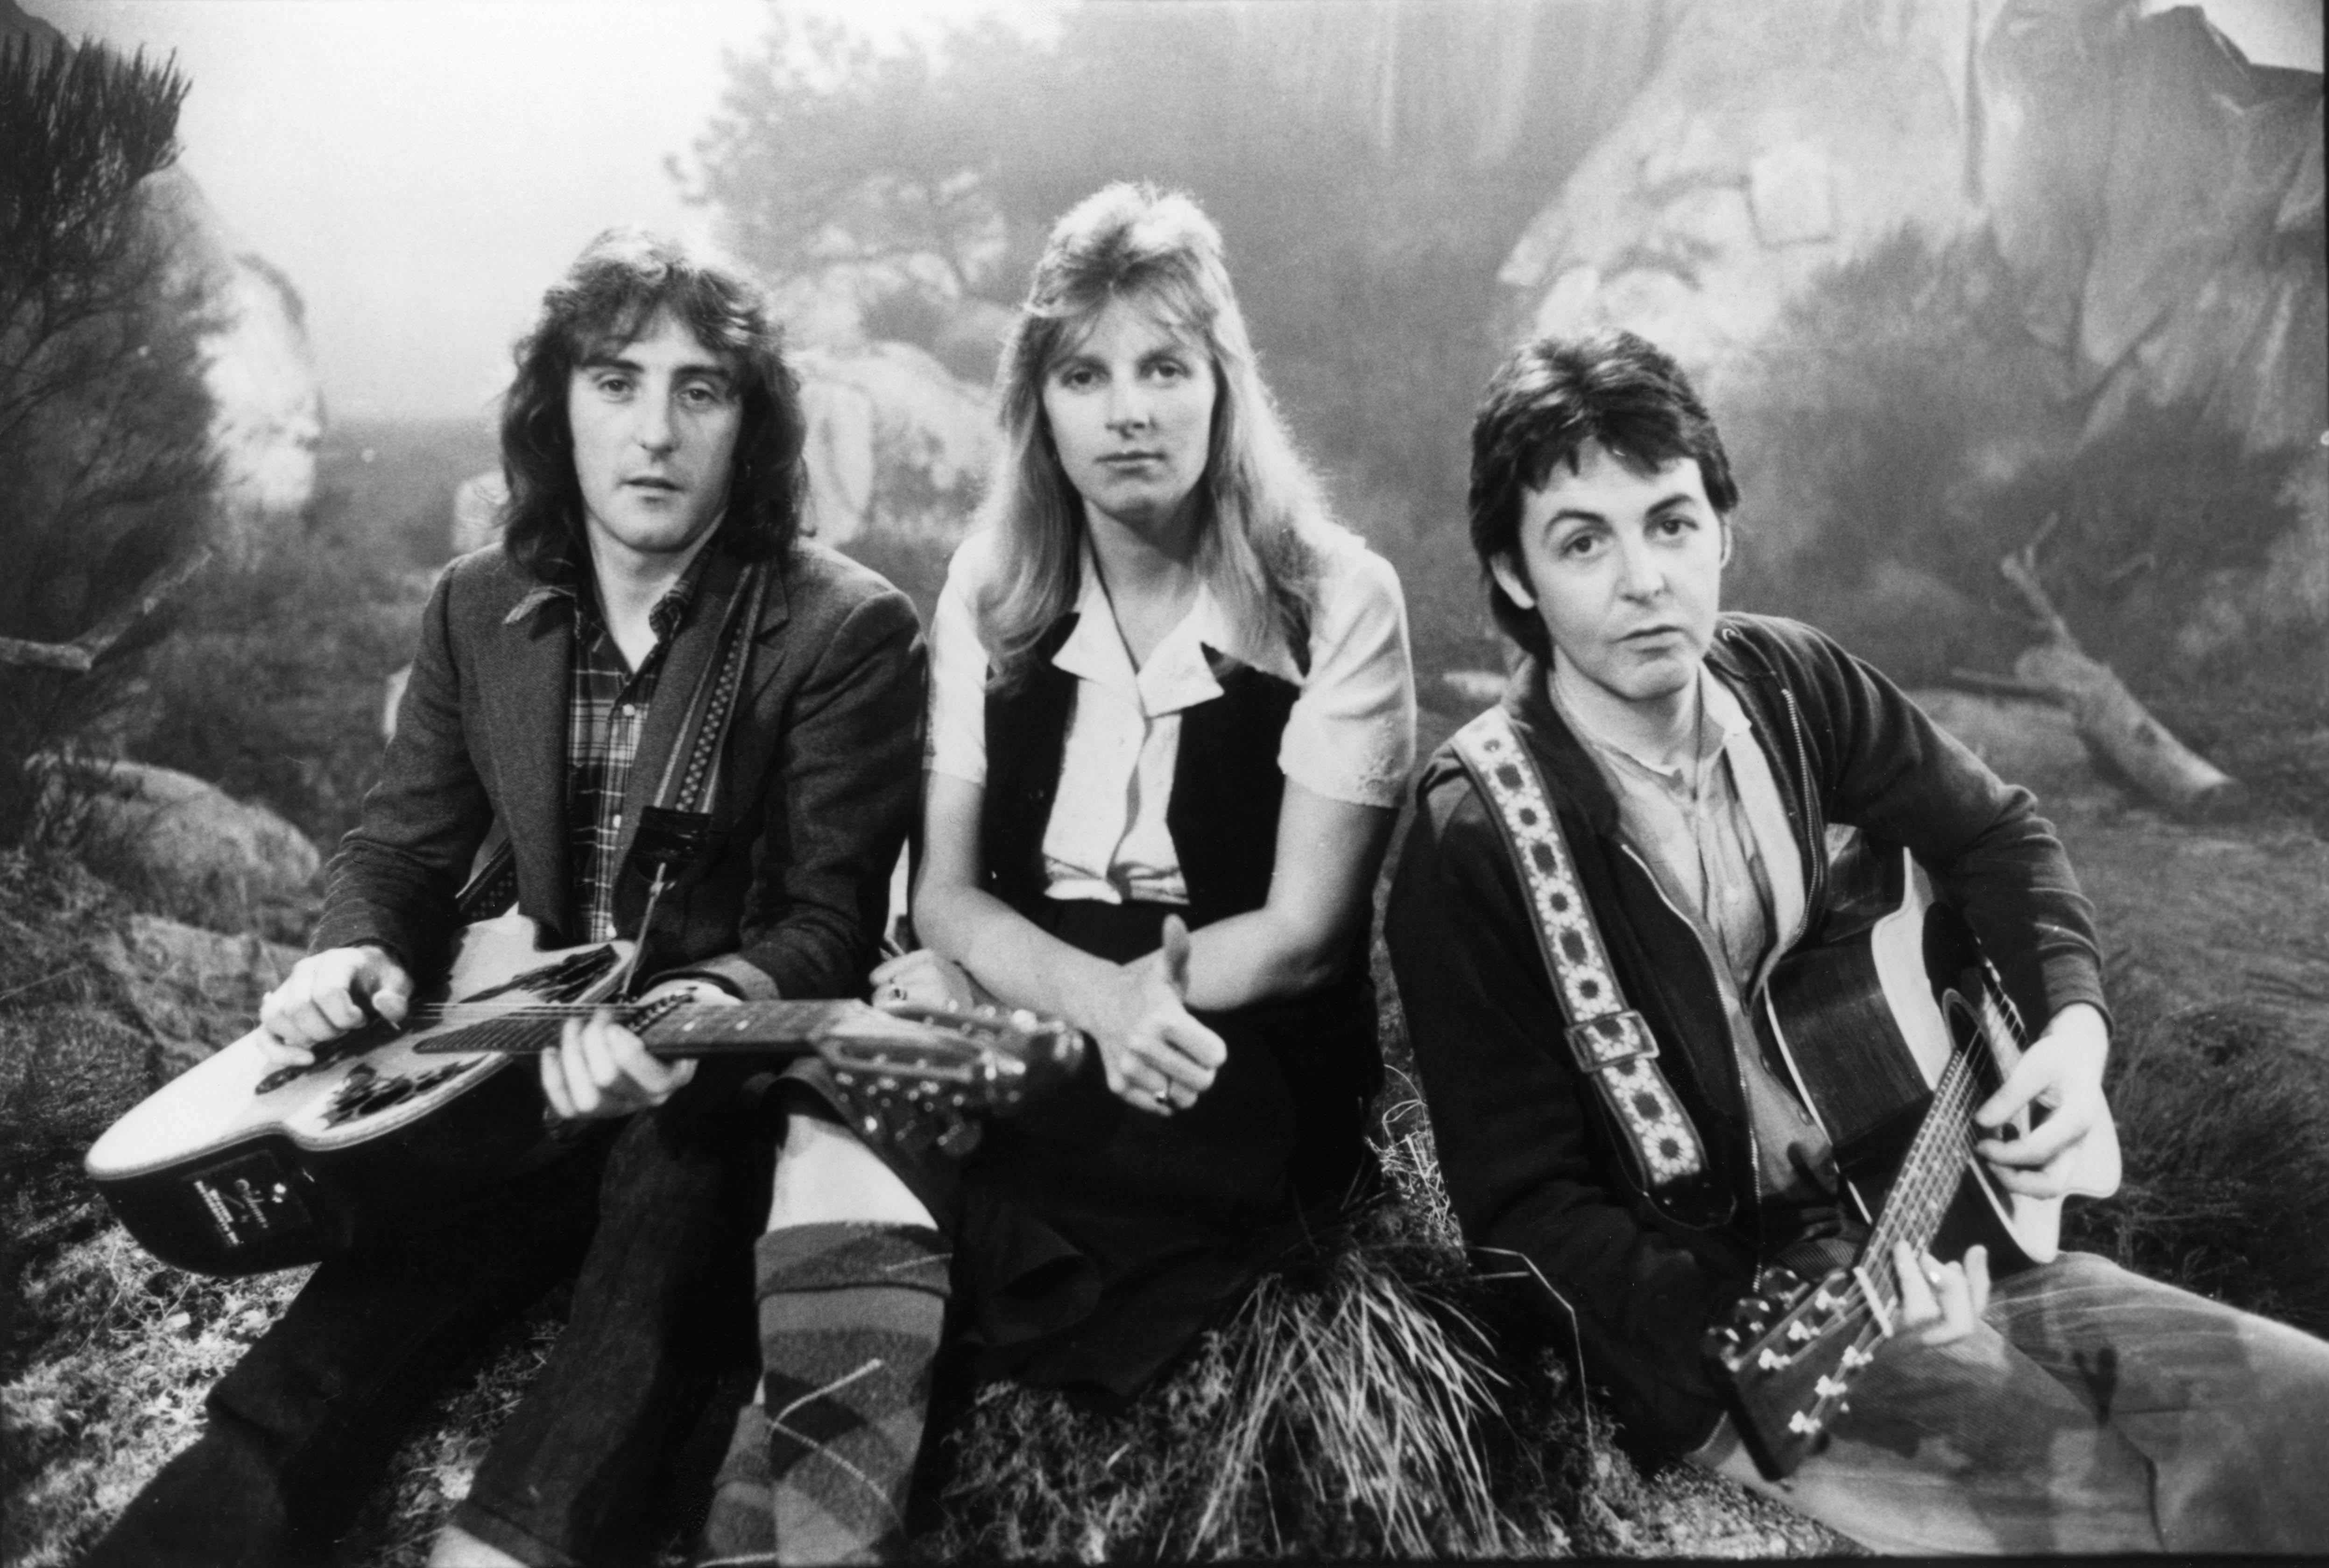 Denny Laine, Linda McCartney, and Paul McCartney of Wings pose for a photo